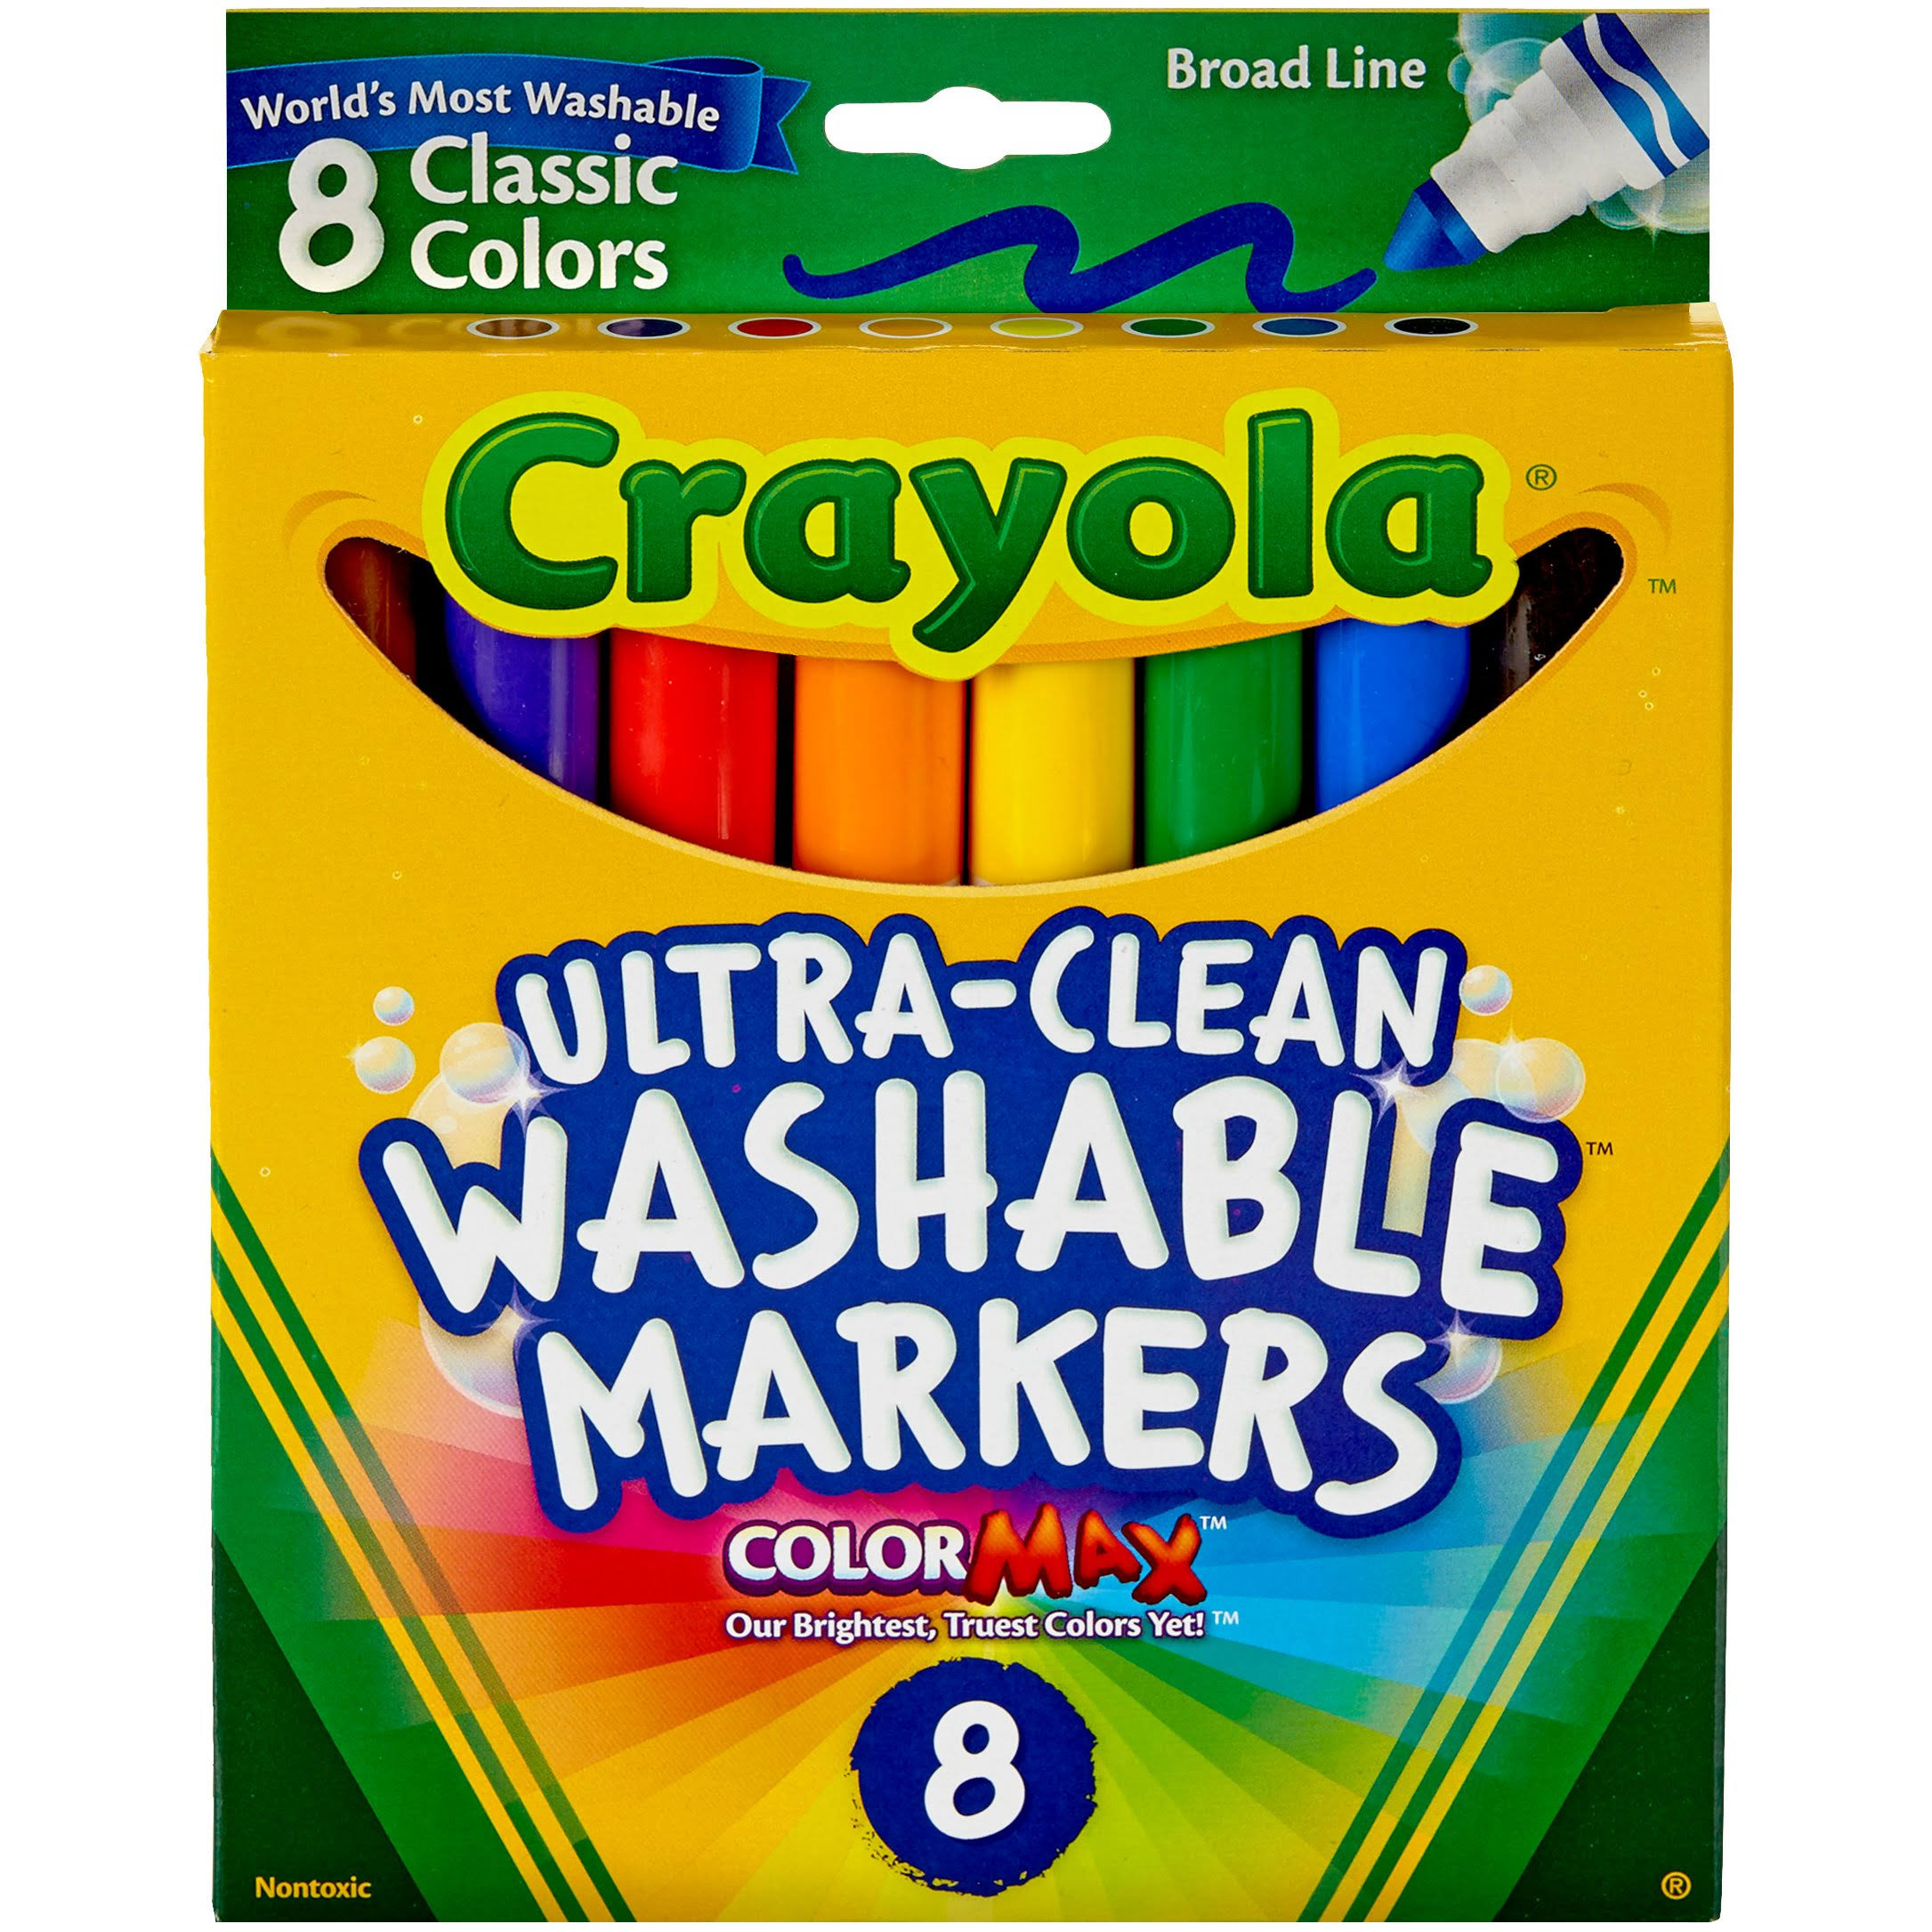 Crayola Washable Markers - 8 Classic Colors